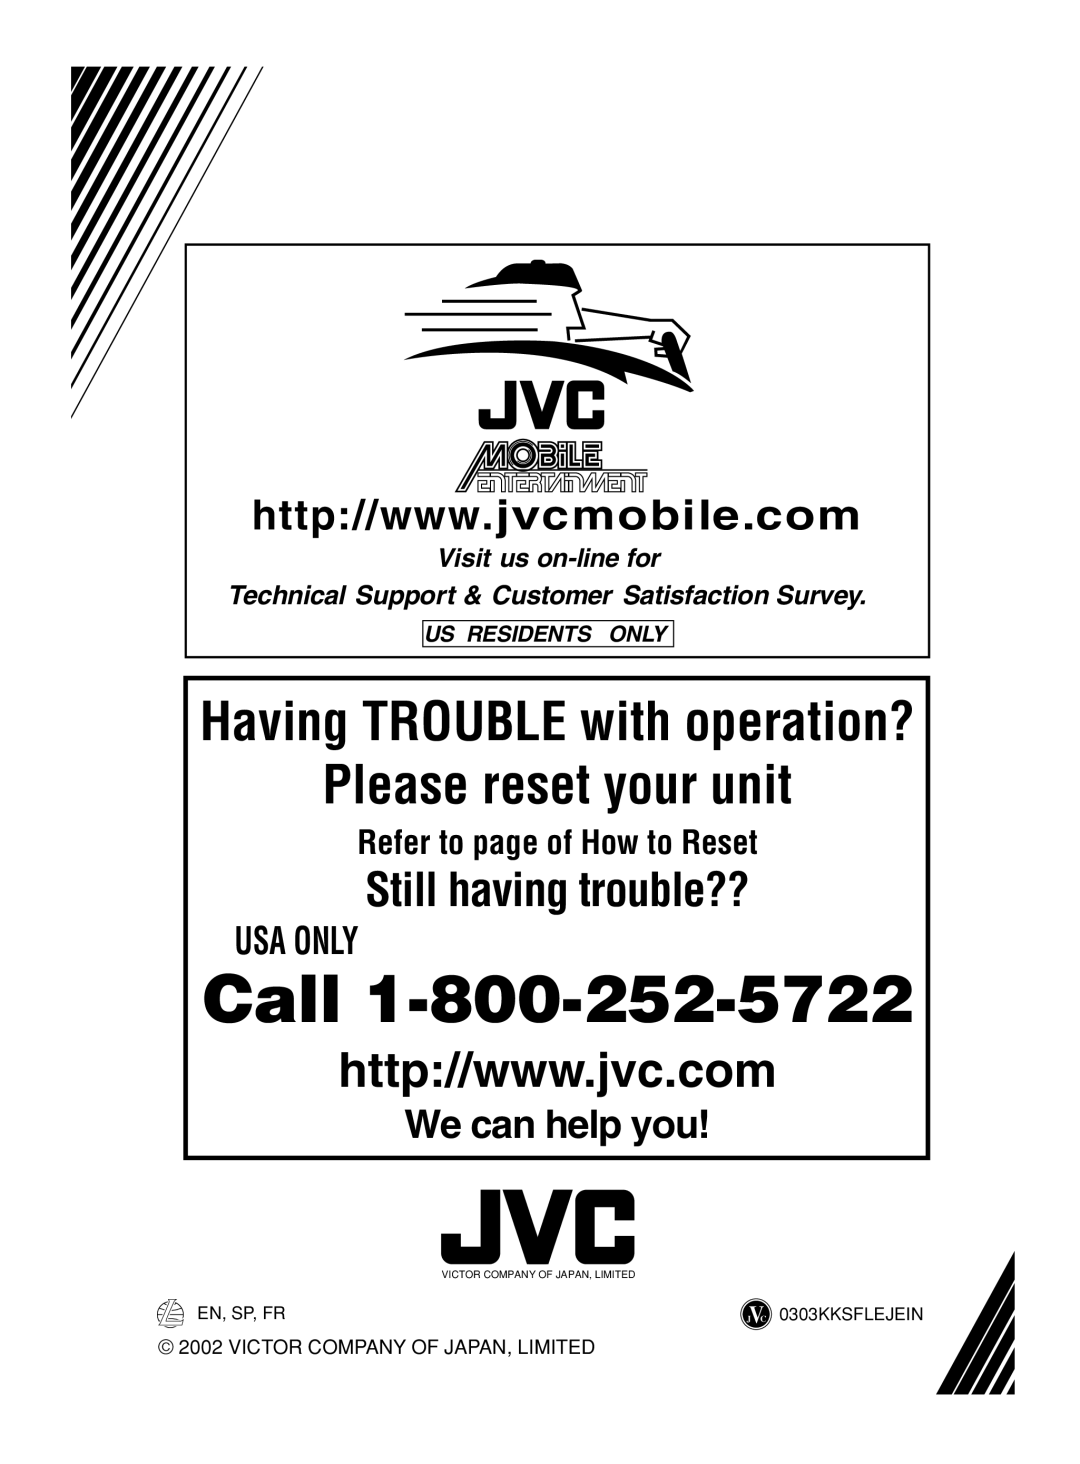 JVC KS-FX490 We can help you, Us Residents Only, Call, Please reset your unit, Having TROUBLE with operation?, Usa Only 